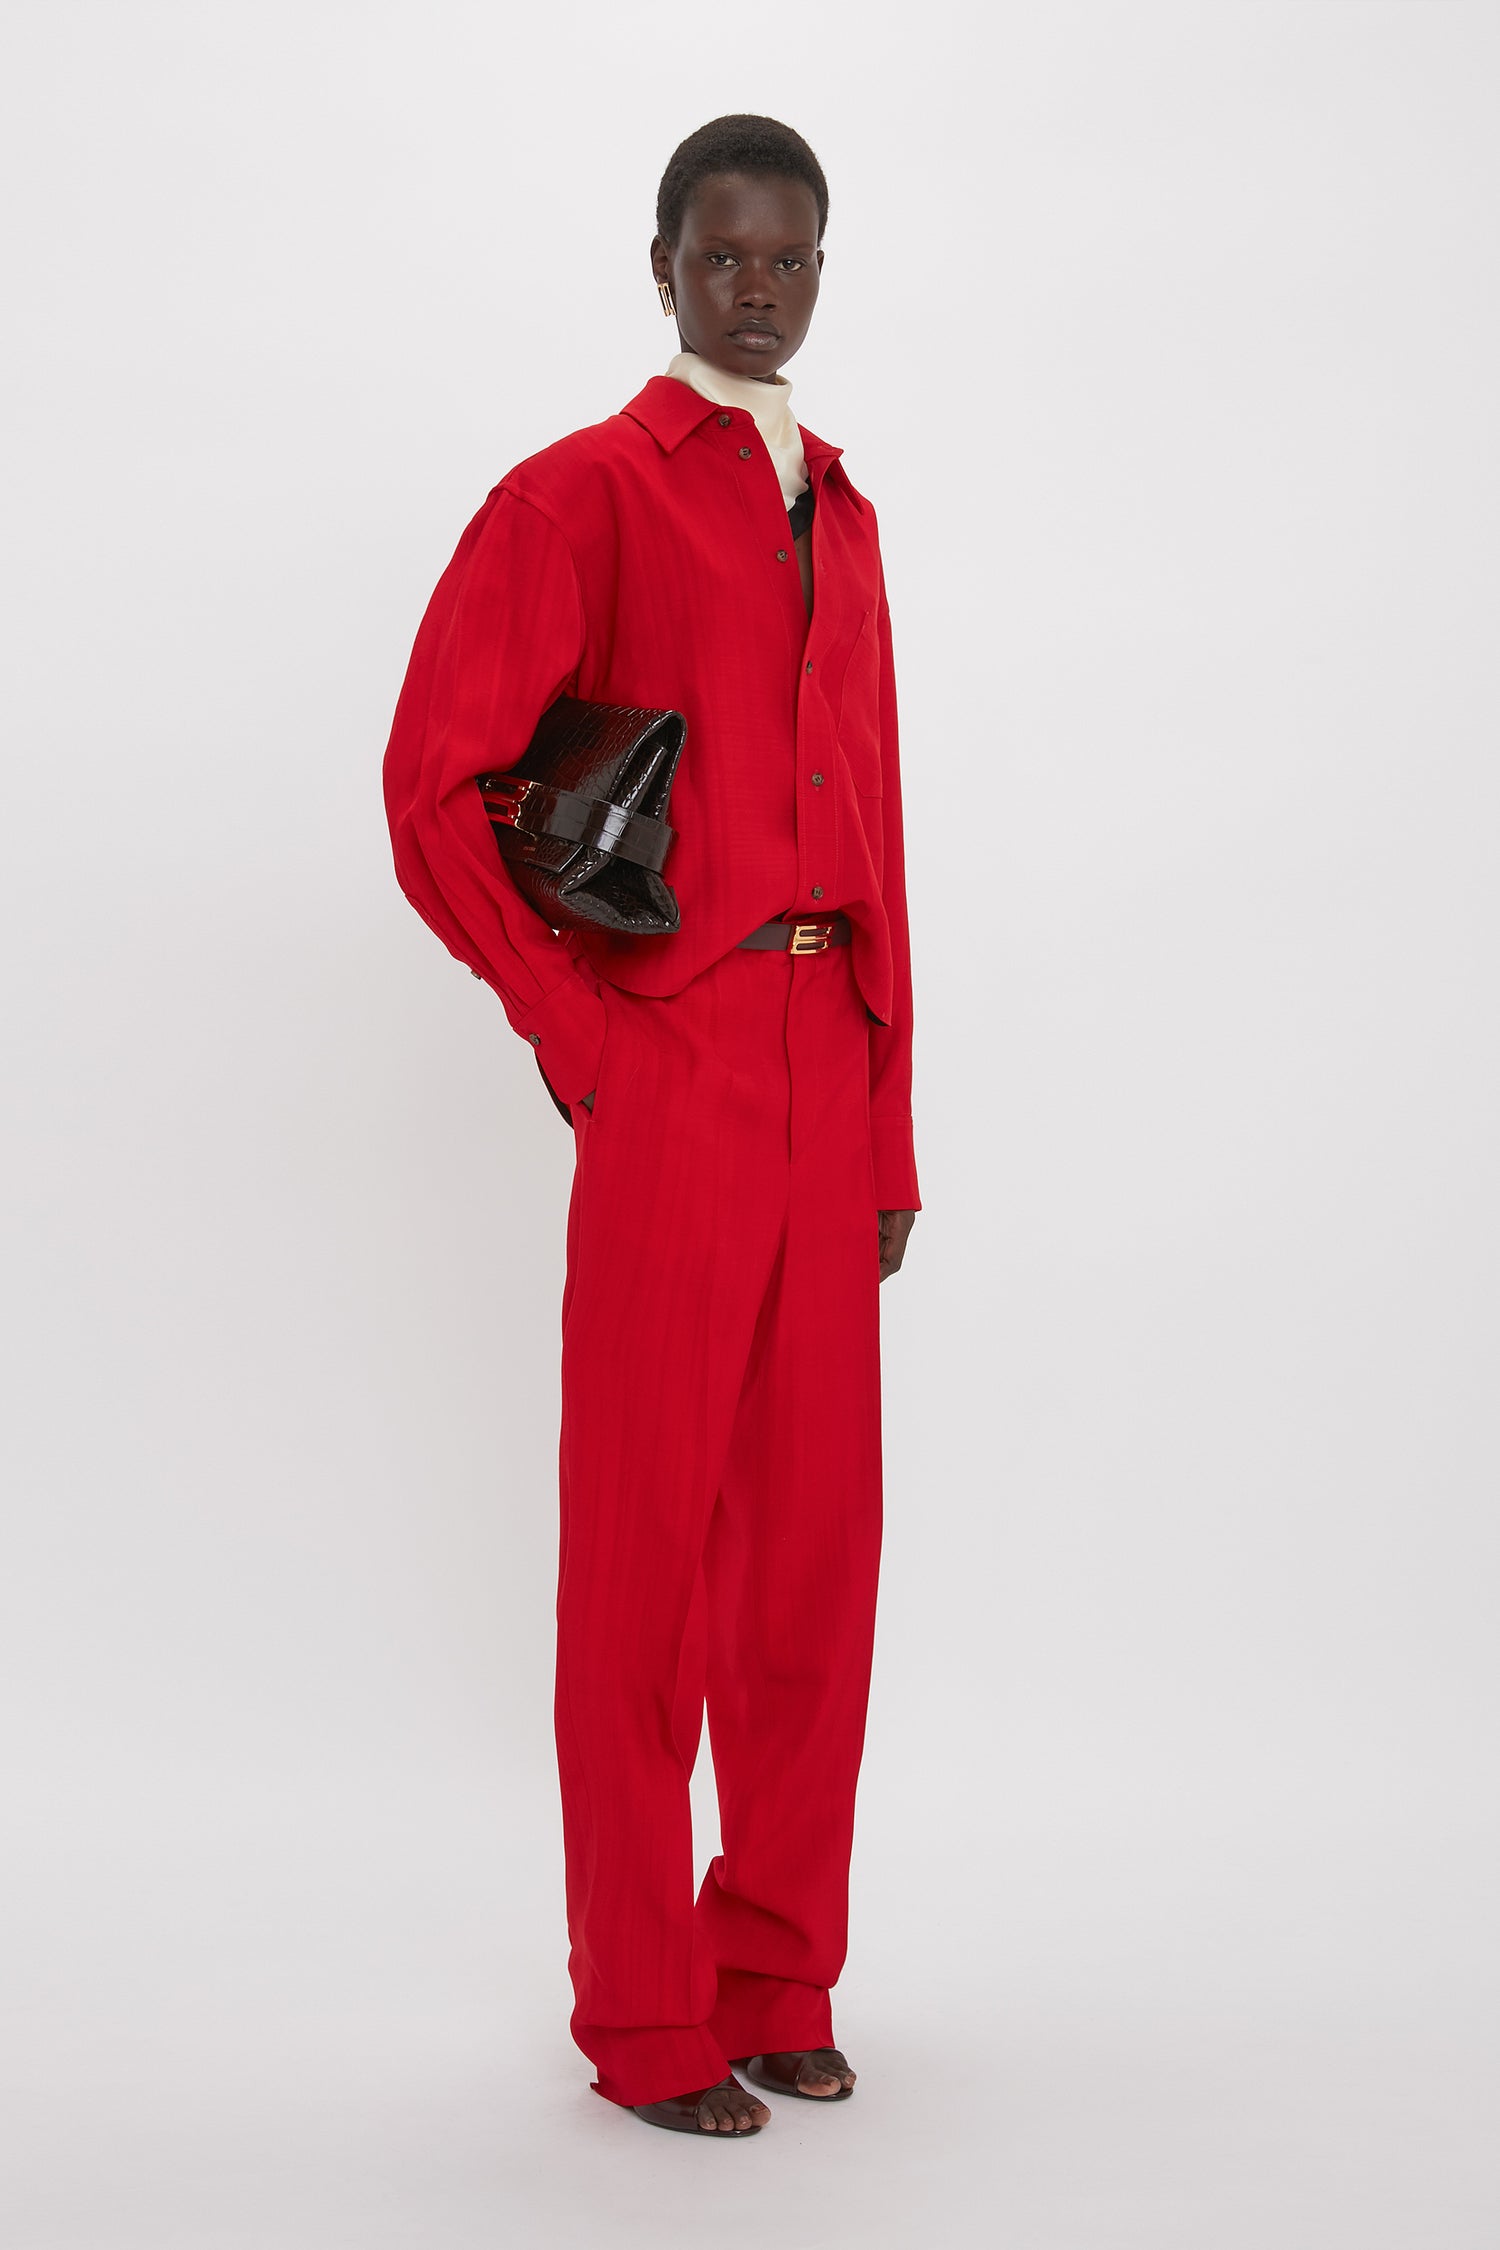 Person standing against a white background, wearing a red outfit with Victoria Beckham Tapered Leg Trouser In Carmine, black top, and holding a black textured handbag.